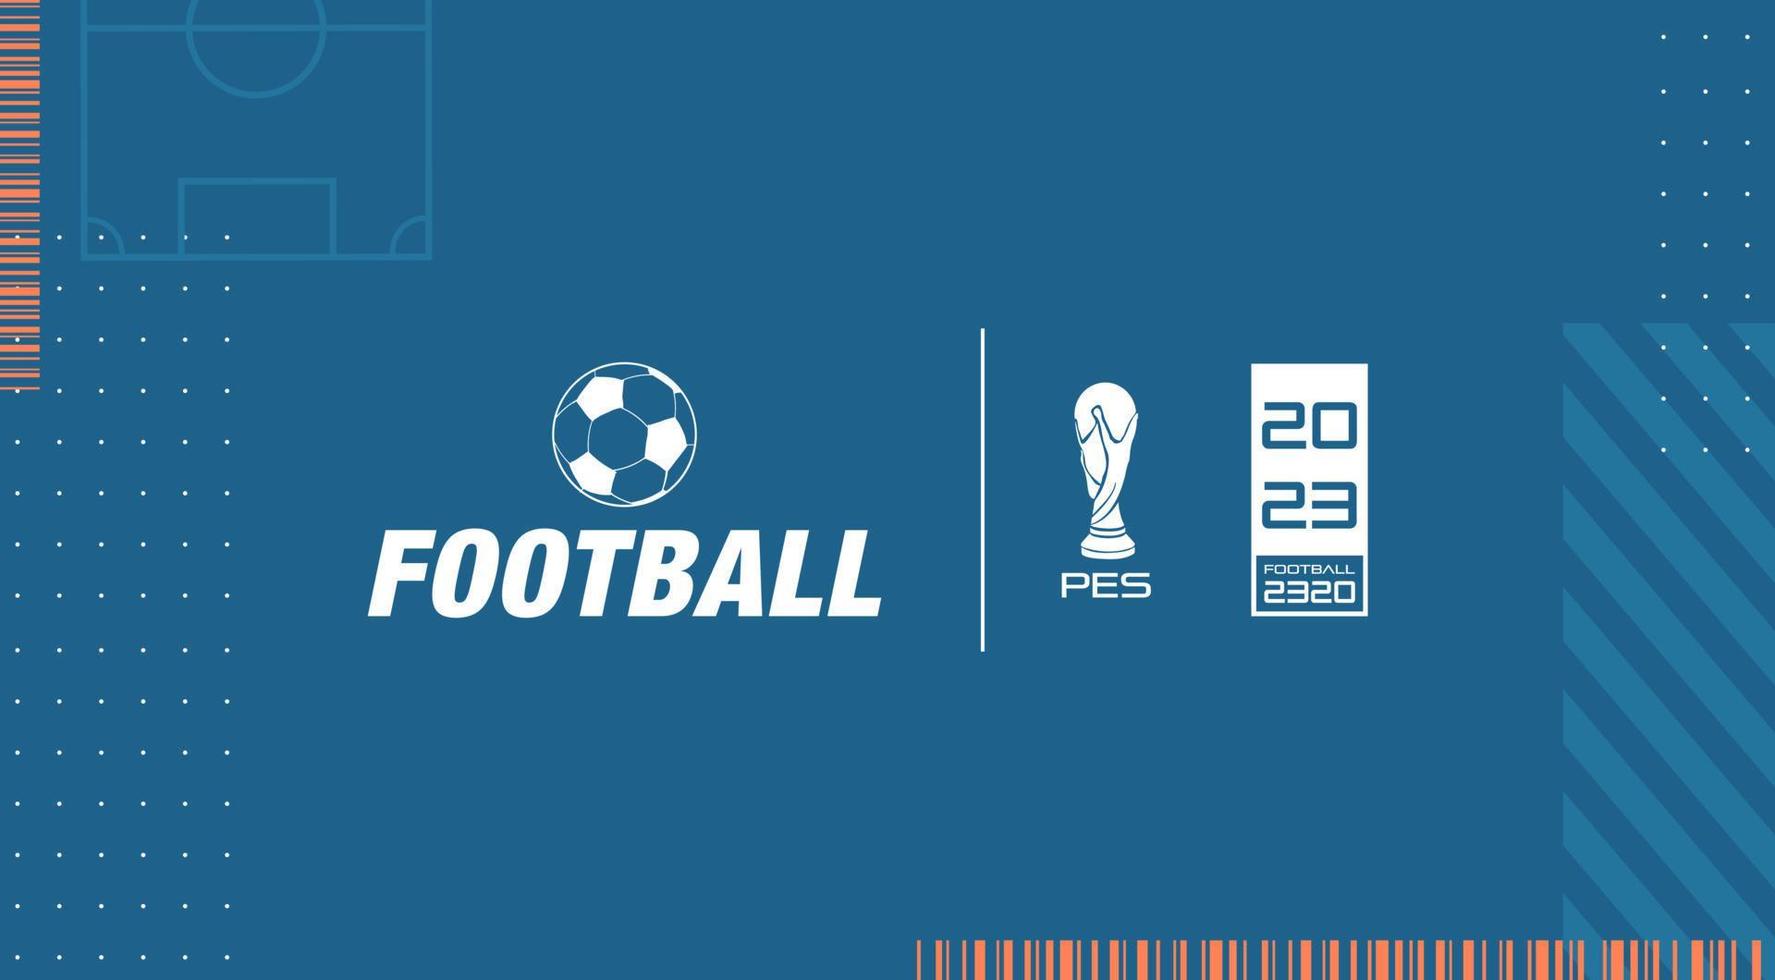 Futuristic Abstract Key visual. Banner with Soccer Pitch, patterns and icons inspired by Football Video Games. Menu screen for sport video games. vector